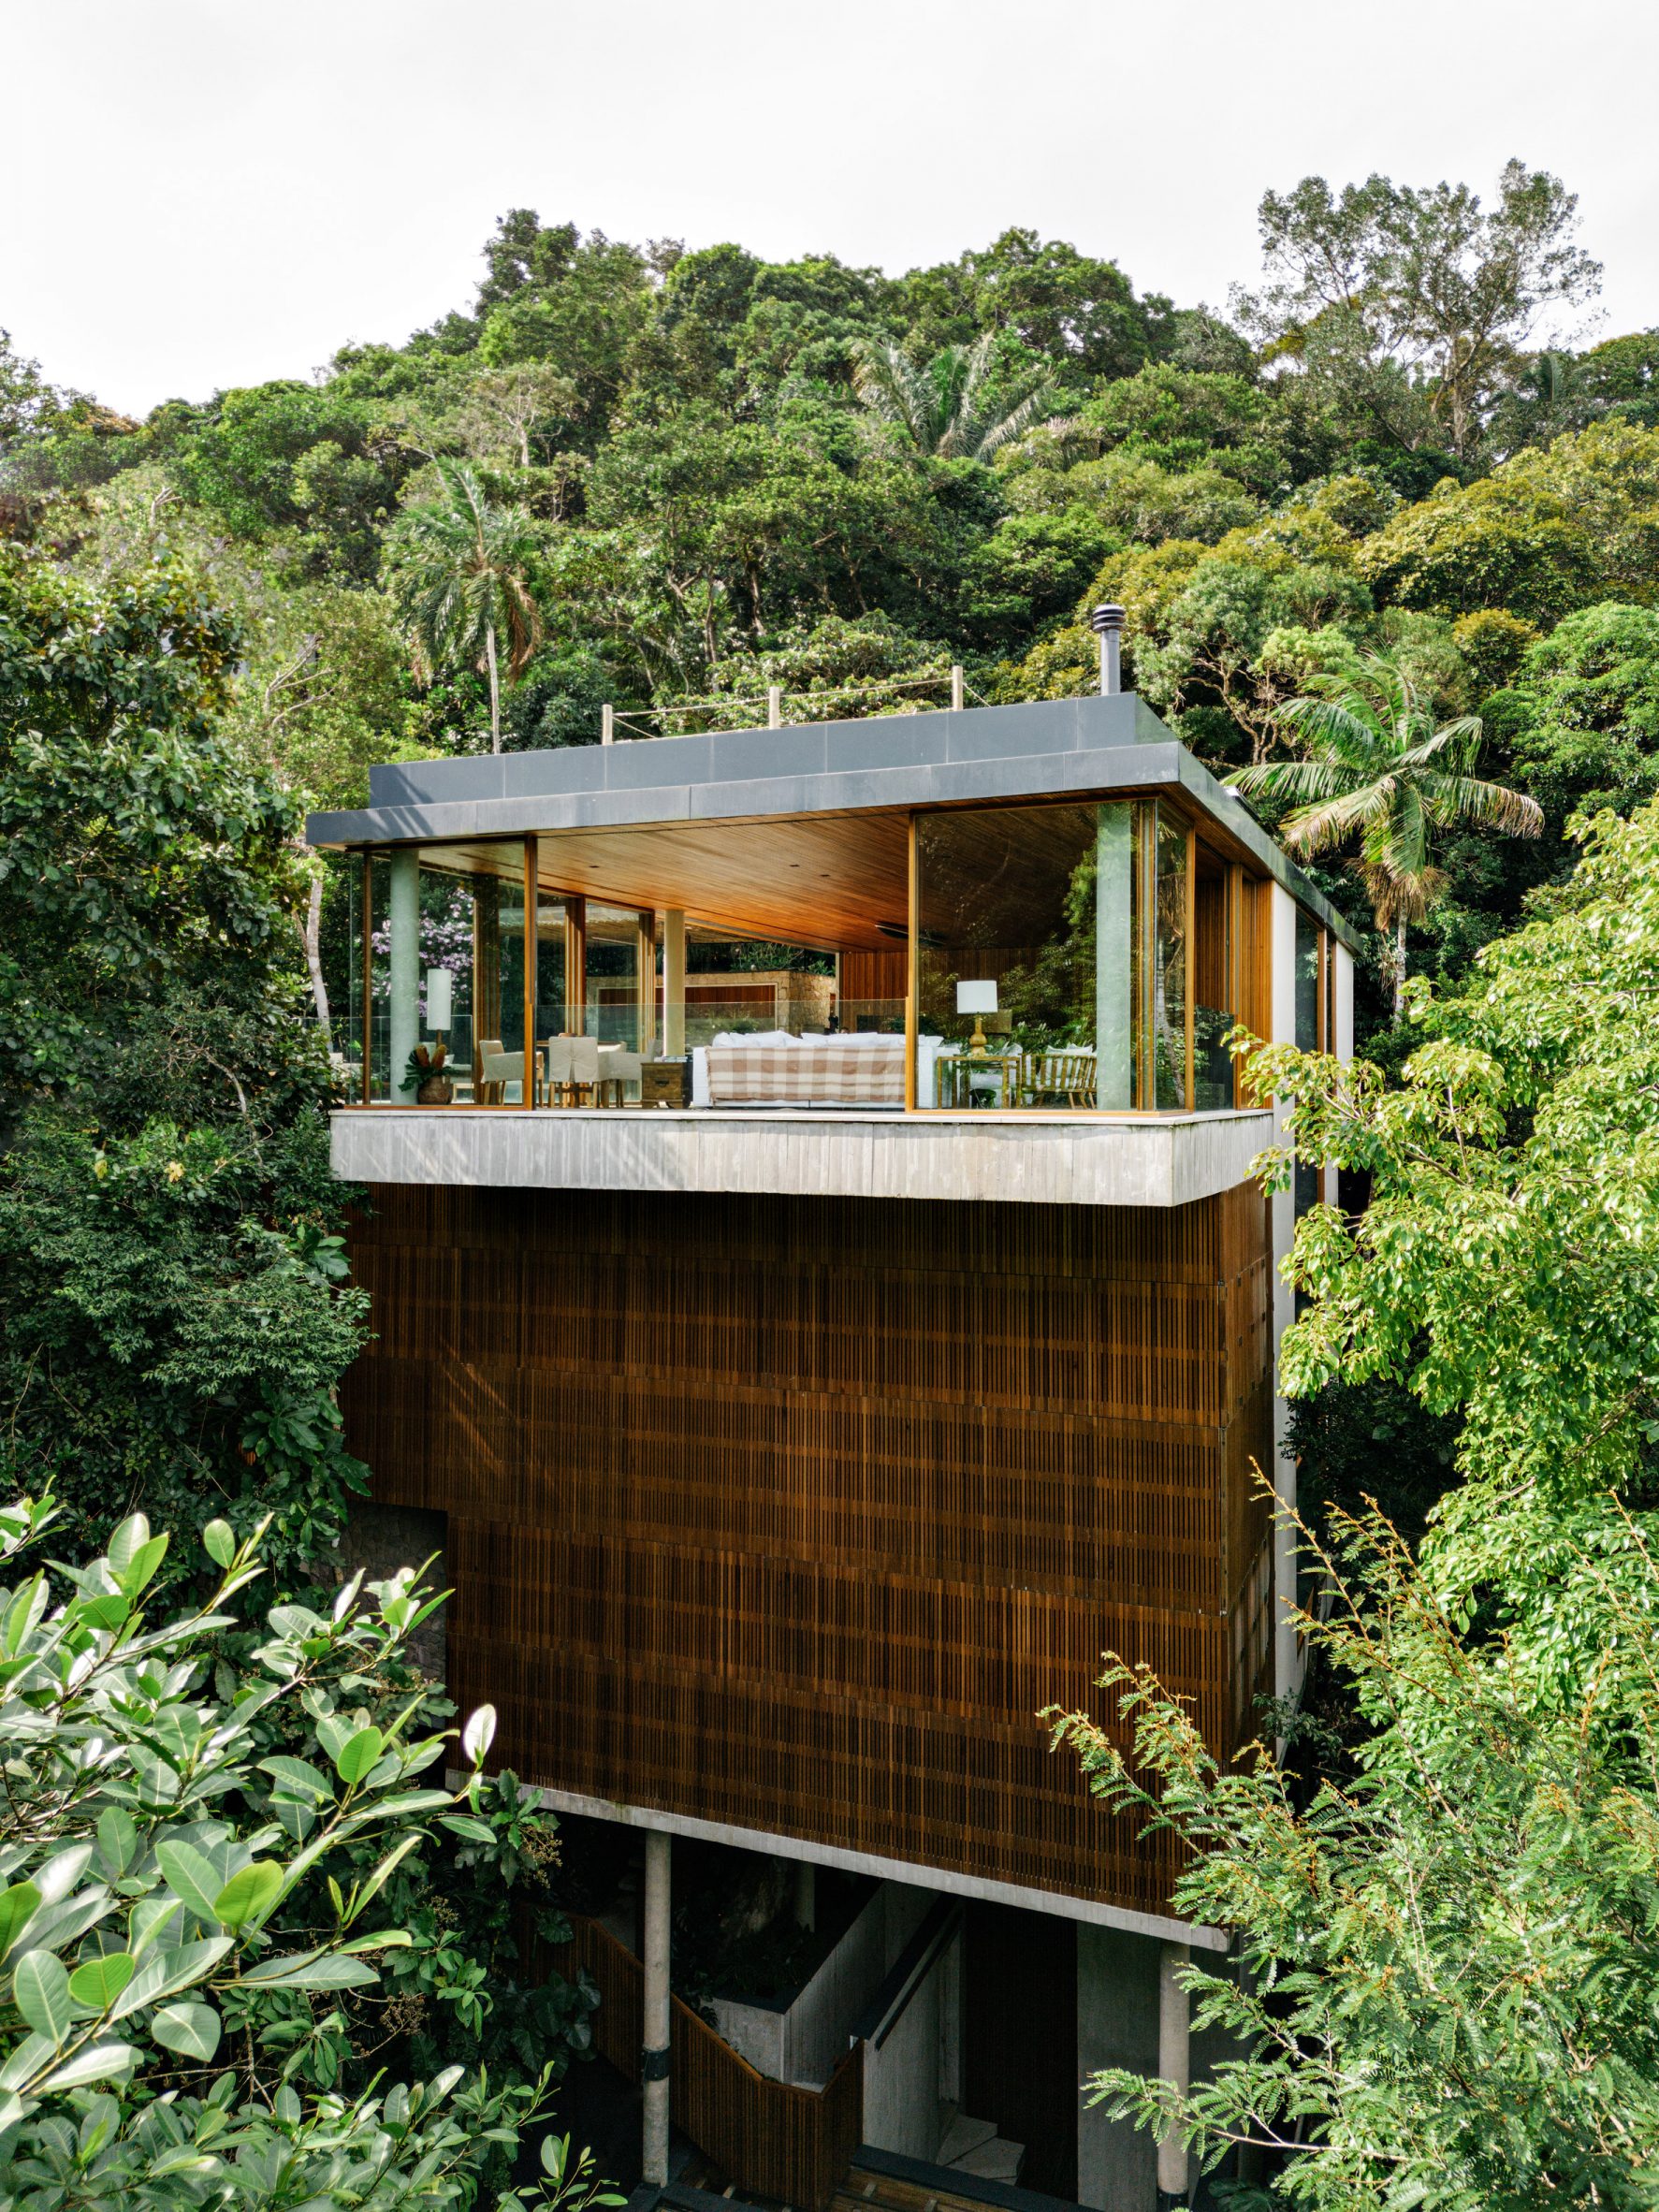 Rectilinear wood-clad home on hillside